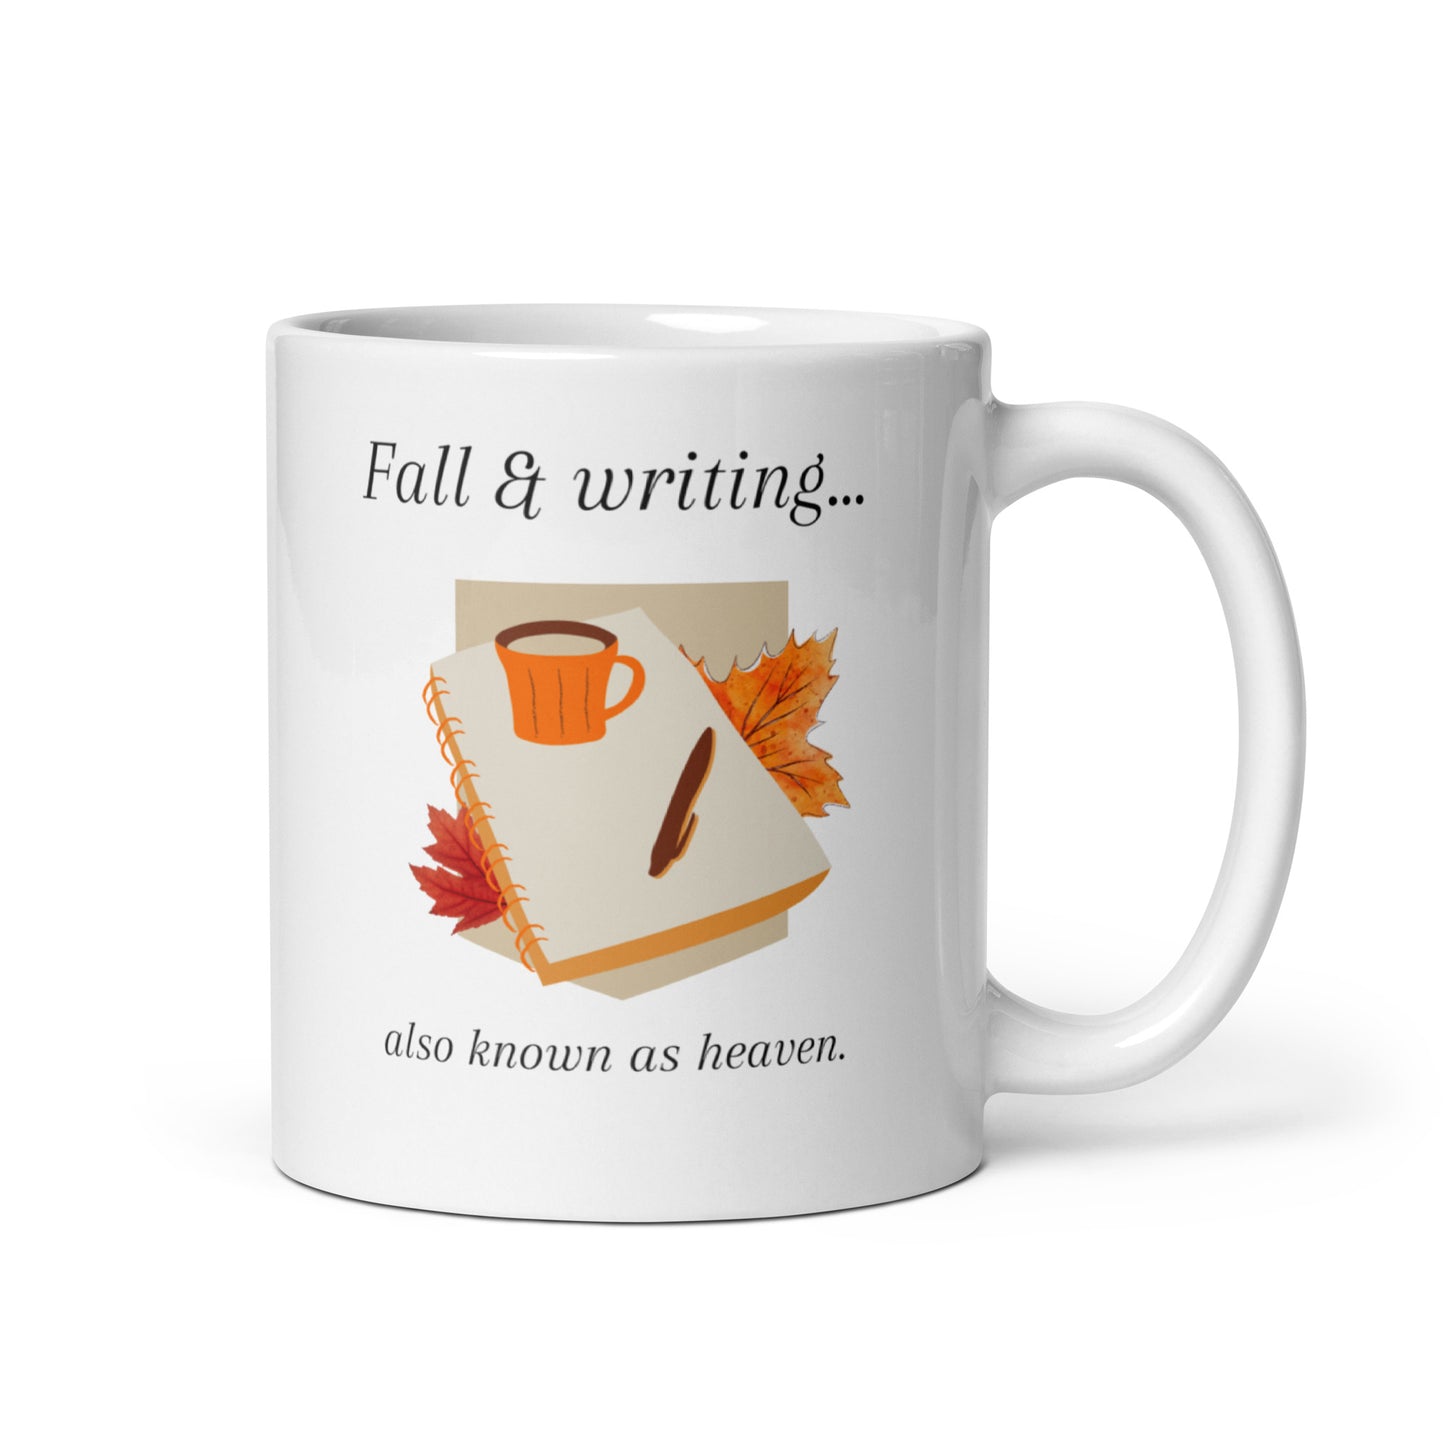 "Fall & writing... also known as heaven." White Glossy Mug